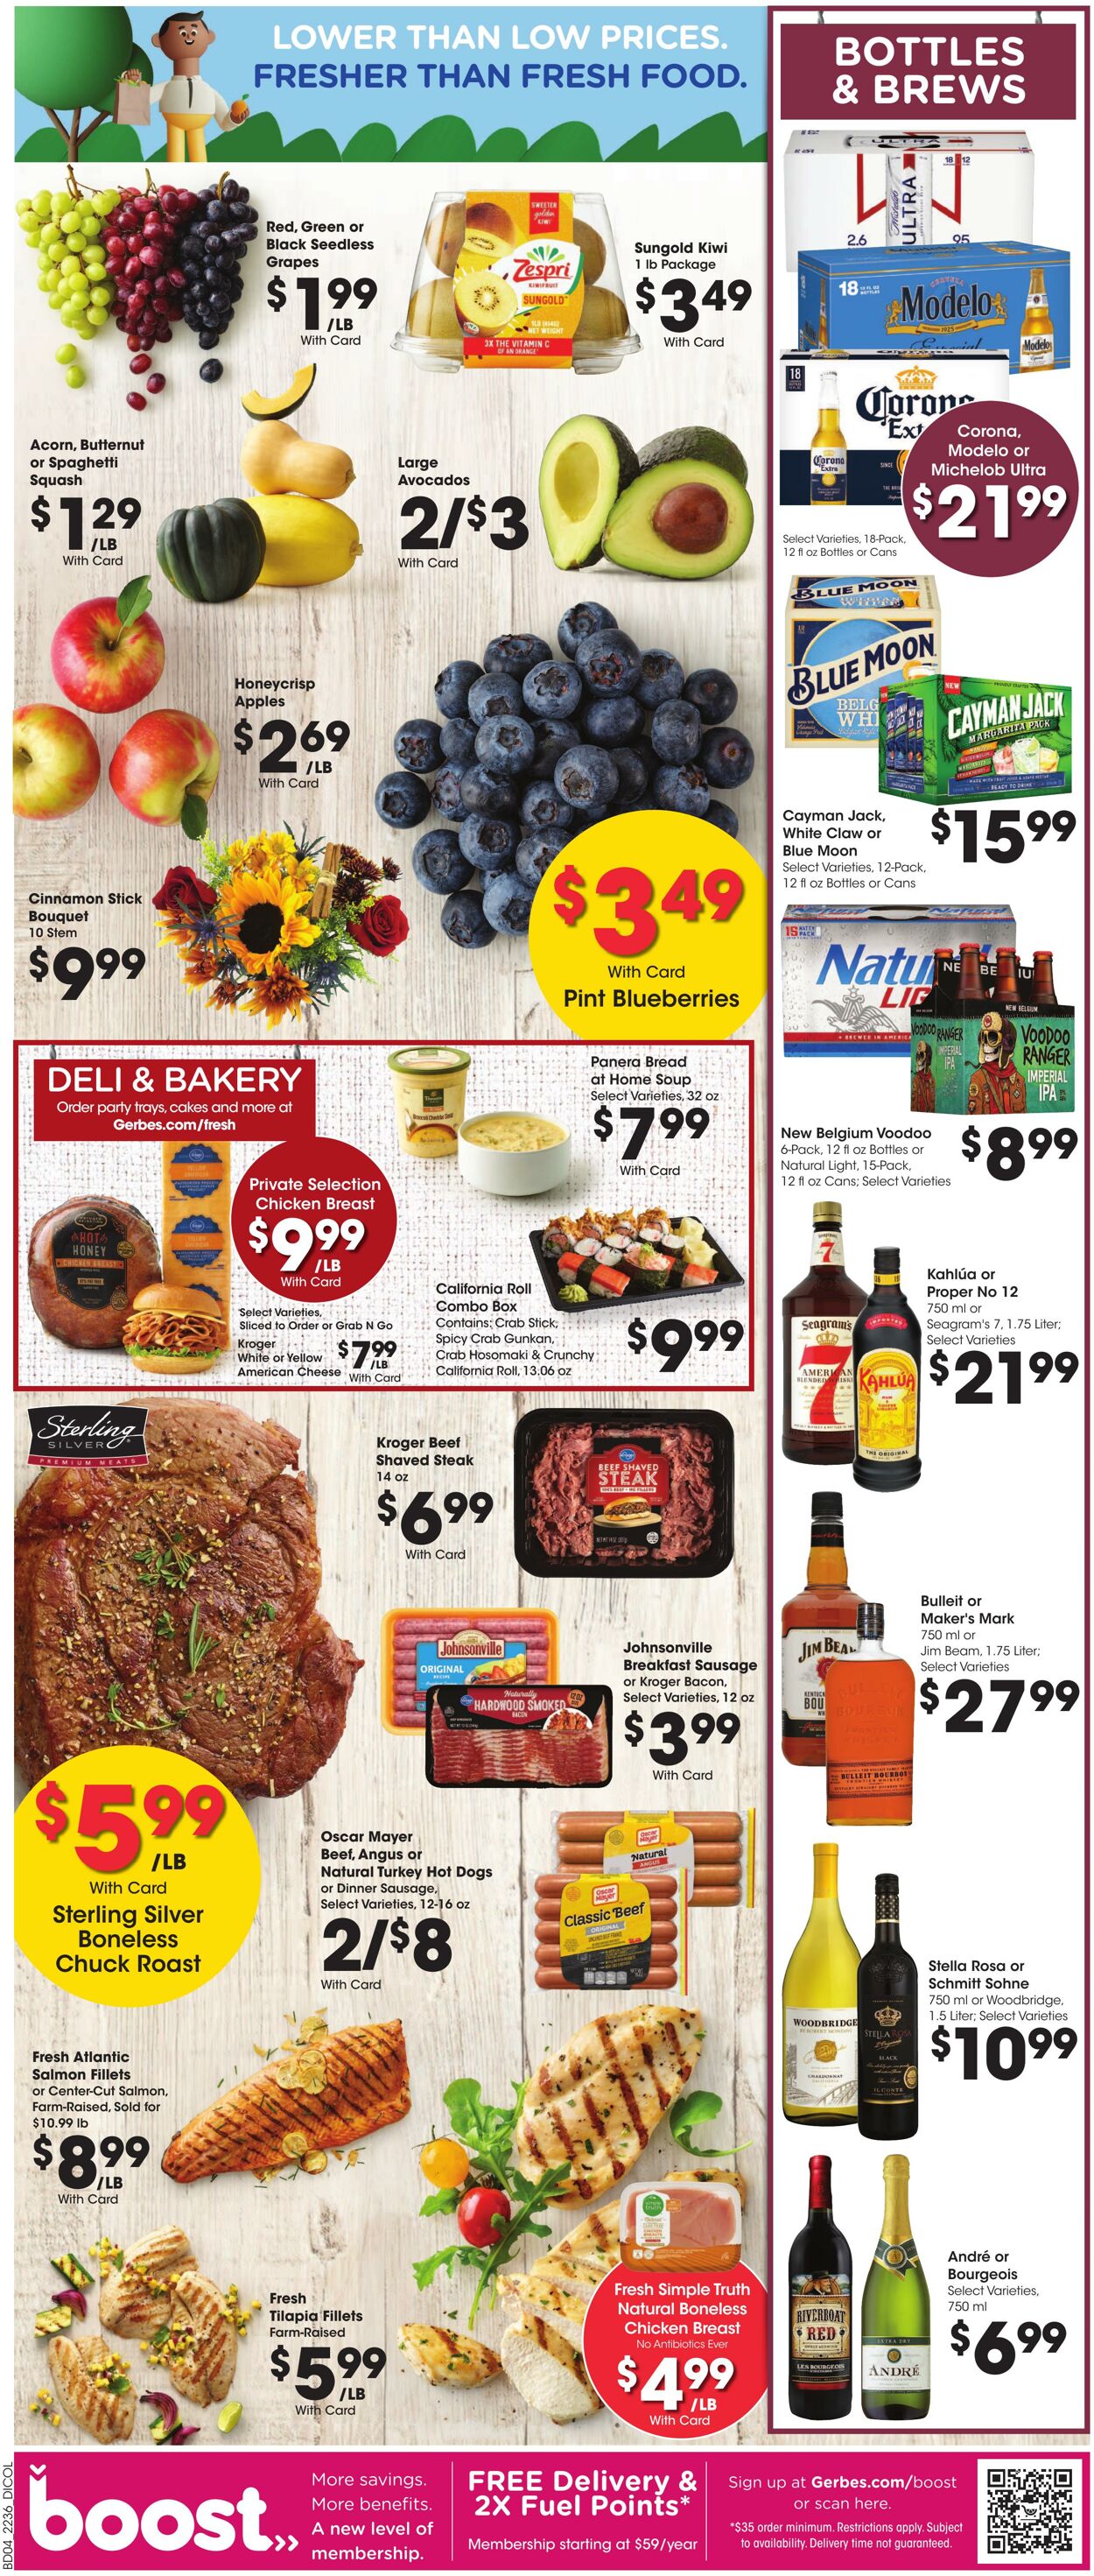 Weekly ad Gerbes Supermarkets 10/05/2022 - 10/11/2022